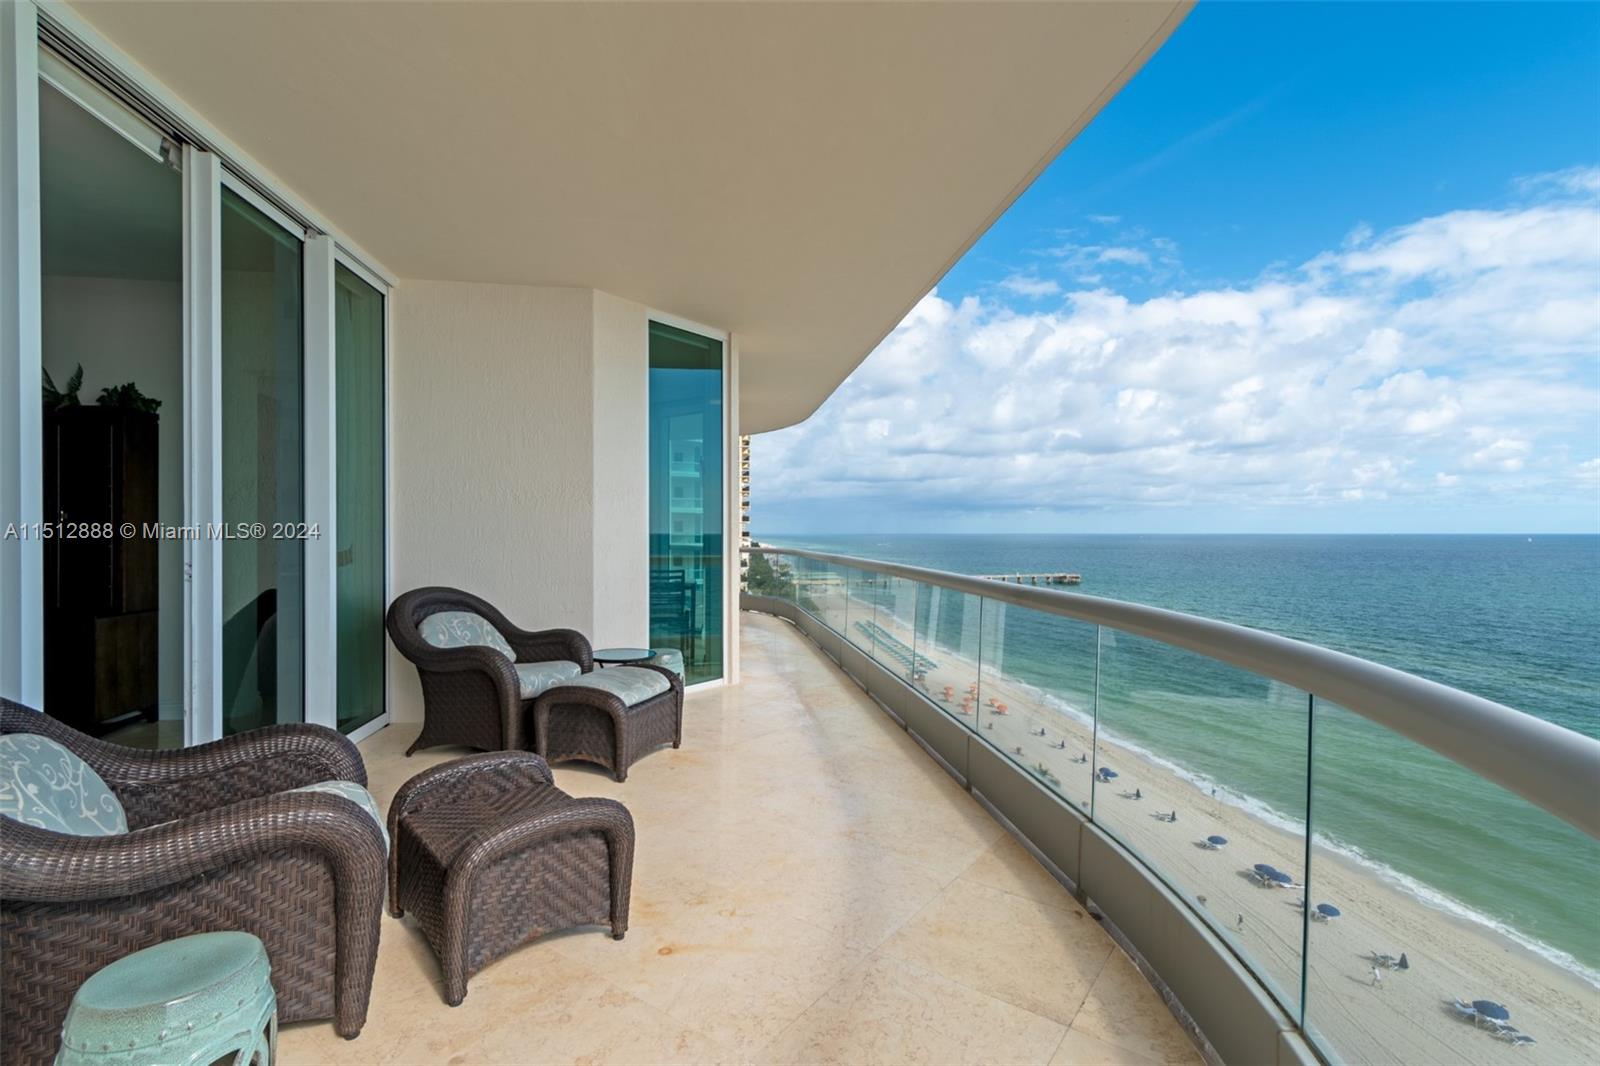 Spectacular, rarely available for sale 2 Bedroom 2.5 Baths Residence at the Luxurious Turnberry Ocean Colony!!! Amazing direct & unobstructed views to the Ocean with floor to ceiling windows. Marble floors throughout,10-ft ceilings, private foyer, Italian kitchen, quartz countertops, Gaggenau and Sub-Zero appliances. Enjoy luxury lifestyle with direct beach access and full service, 2 restaurants, bar, well-equipped gym, spa, kids game room, and more. Motivated seller